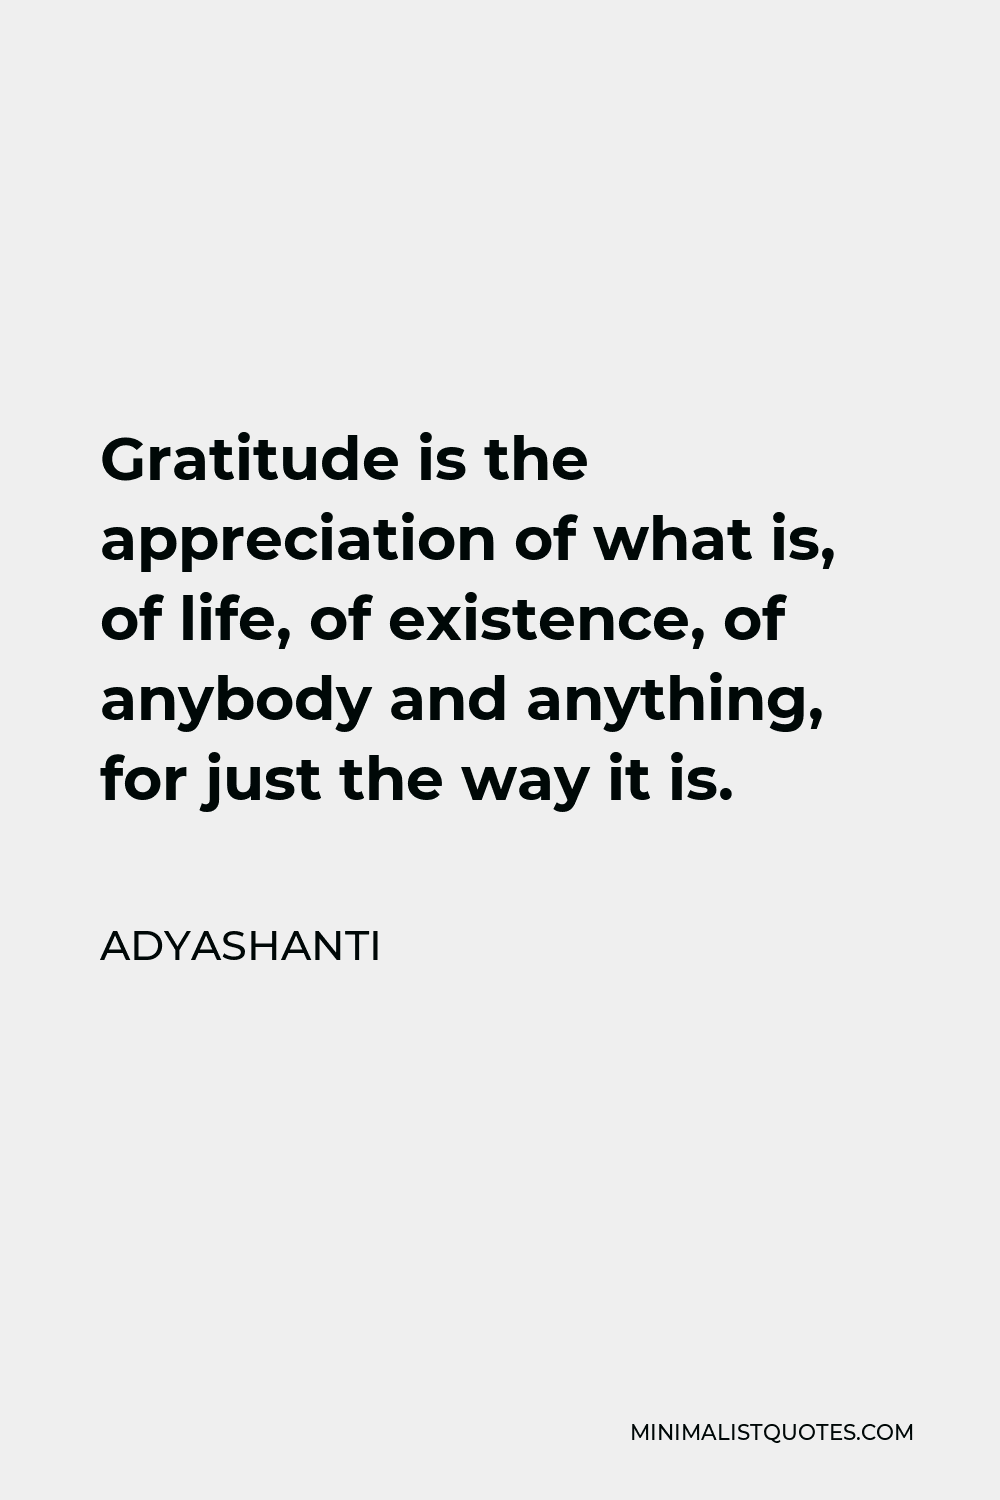 Adyashanti Quote - Gratitude is the appreciation of what is, of life, of existence, of anybody and anything, for just the way it is.